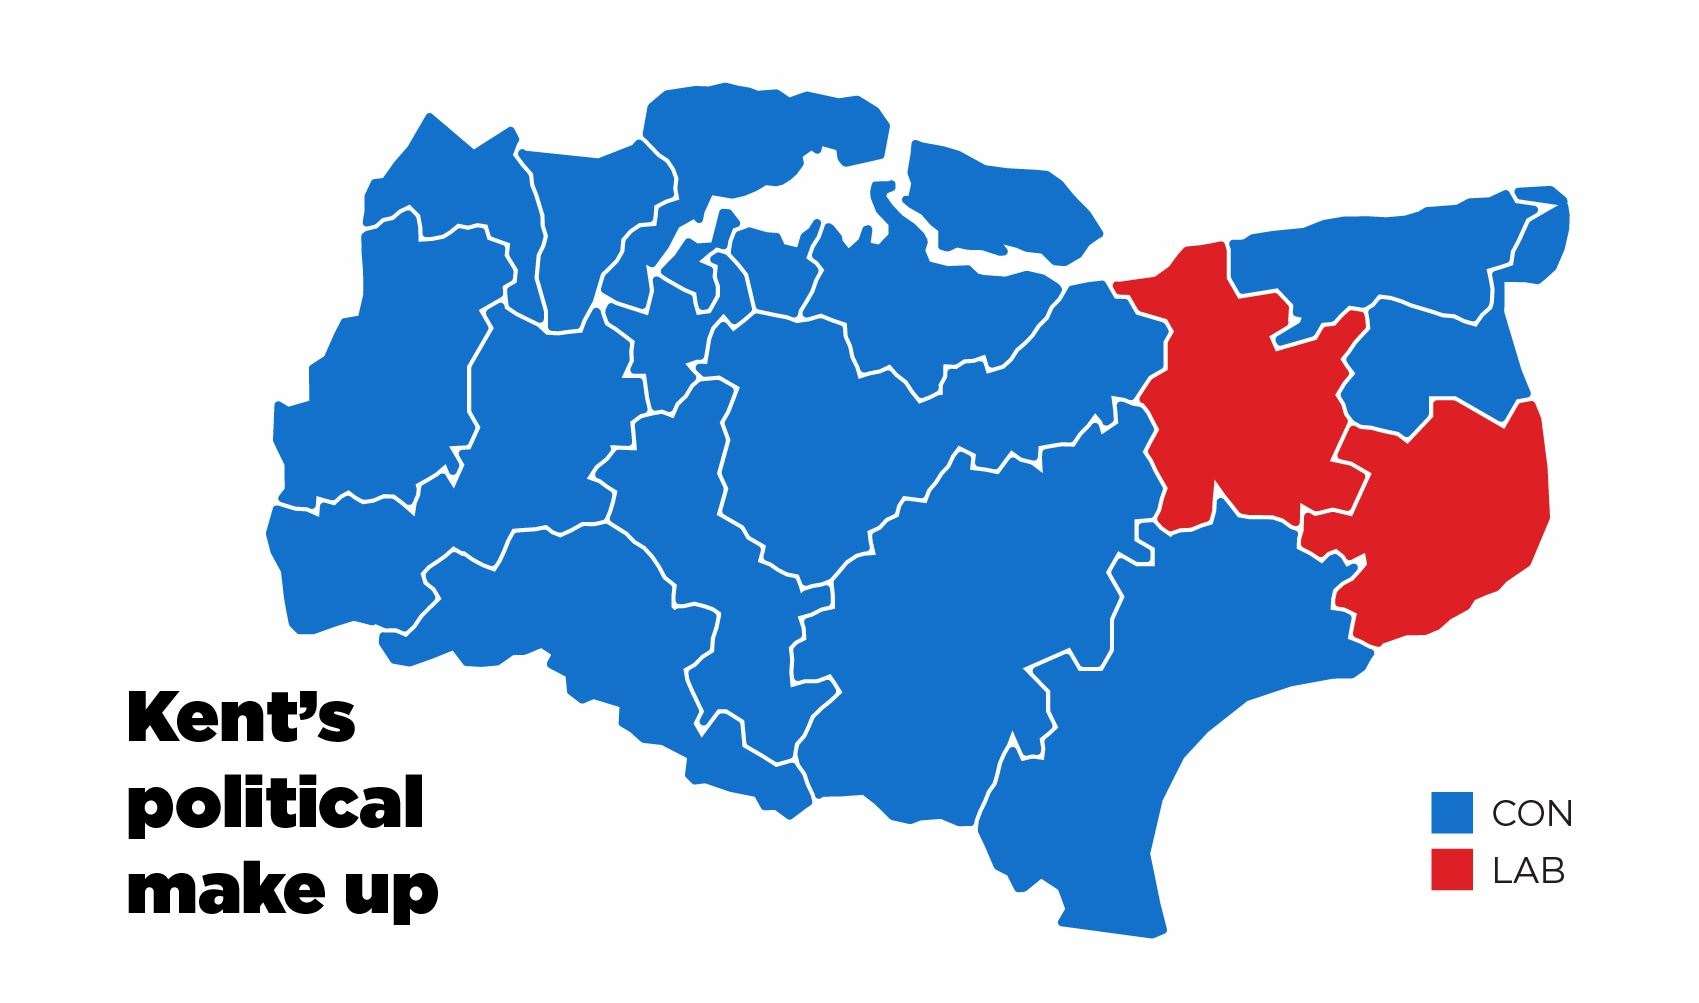 The current political map of Kent